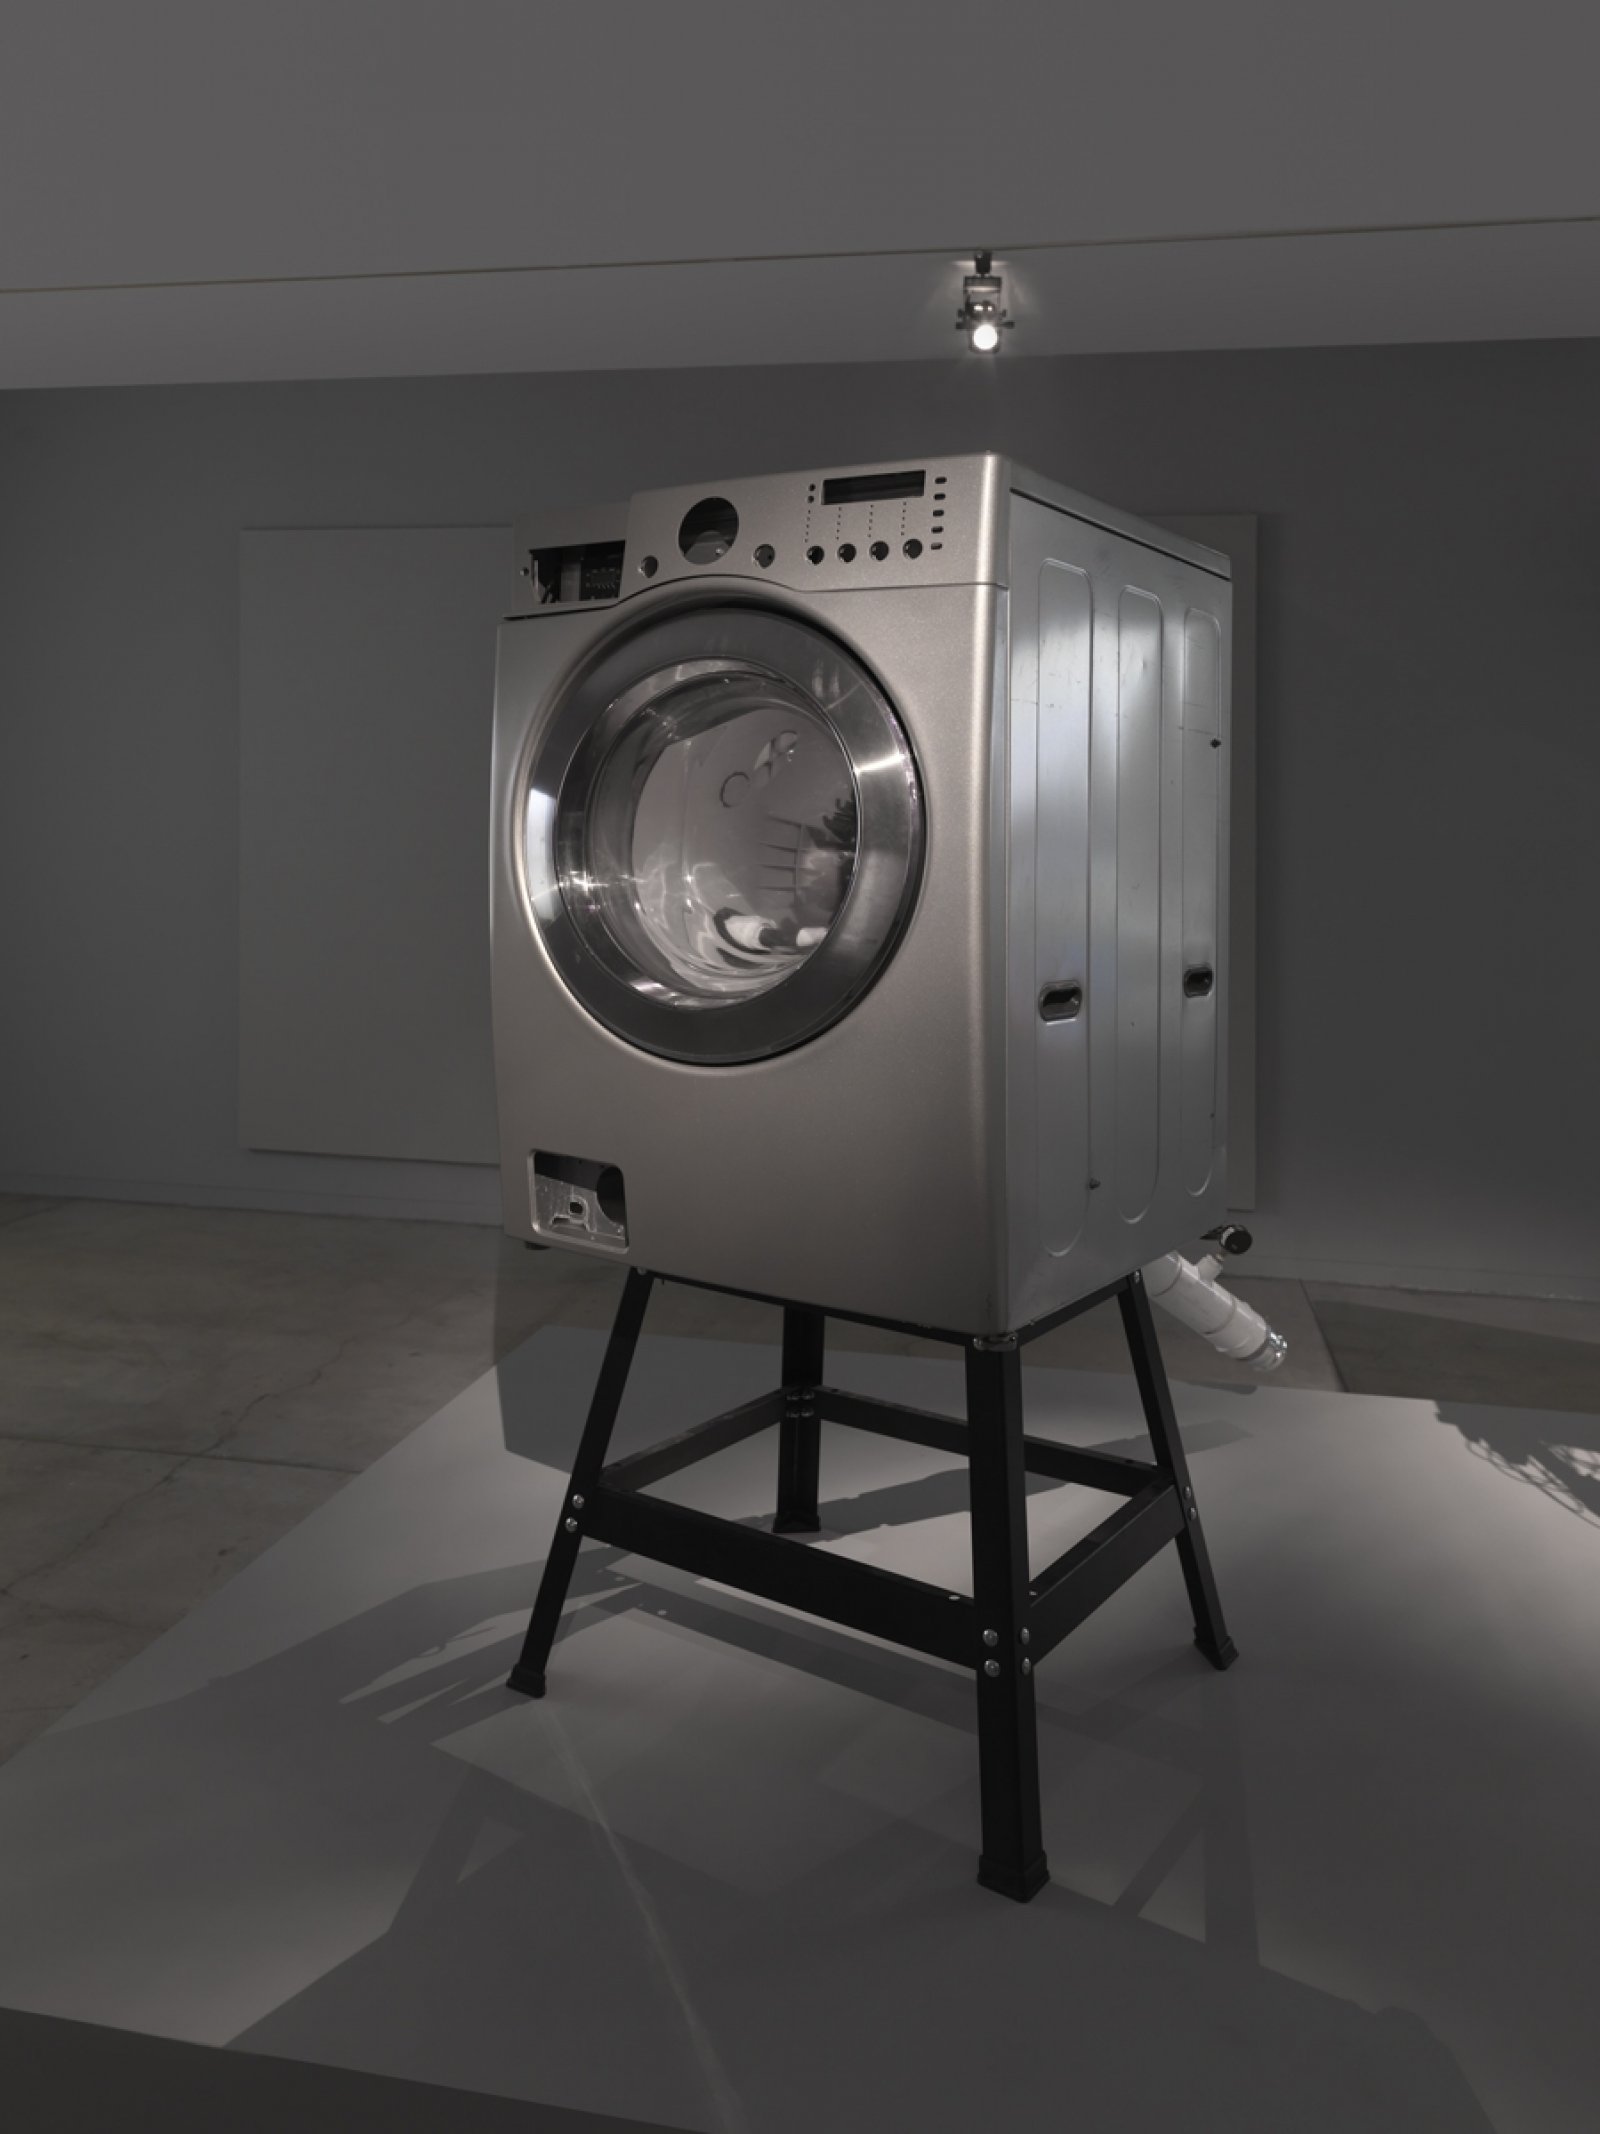 Kevin Schmidt, How to Make an Off-Grid Hydroelectric Light Show, 2018, 2-channel video, direct-drive washing machine, hose, cables, battery, inverter, modular synthesizer, lights, set of instructional videos on youtube, dimensions variable. Installation view, We Are the Robots, Vancouver Art Gallery, Vancouver, 2018